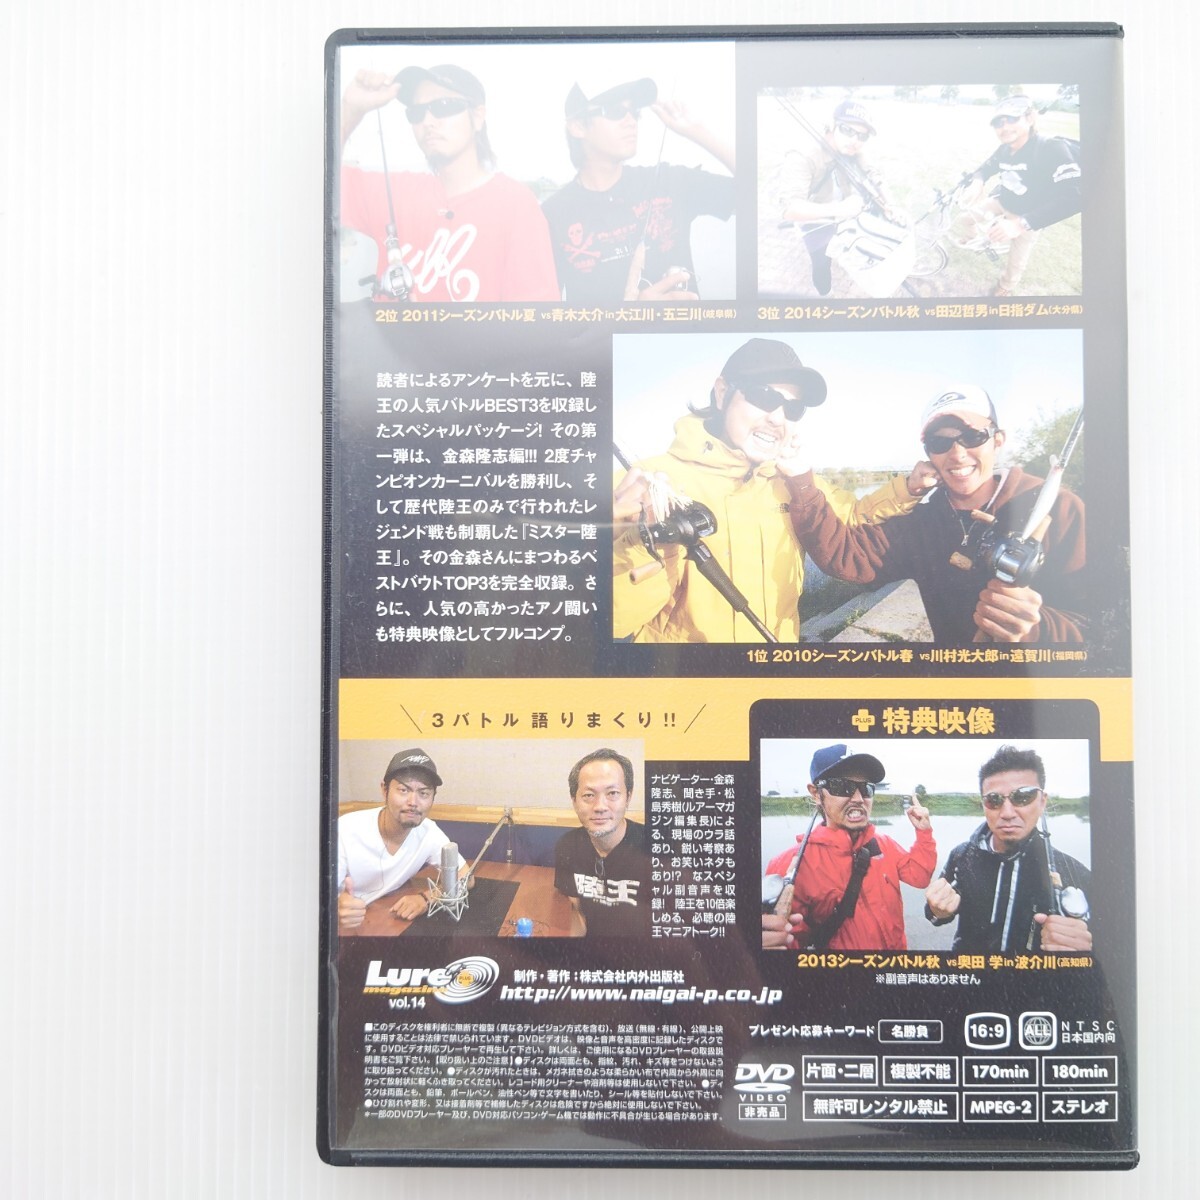 [DVD] land .THE BEST BOUT/ The * the best bow to gold forest .. compilation / also .: Aoki large ., rice field side . man, river . light large . another [170 minute +180 minute = total 350 minute /2 sheets set /ruamaga]